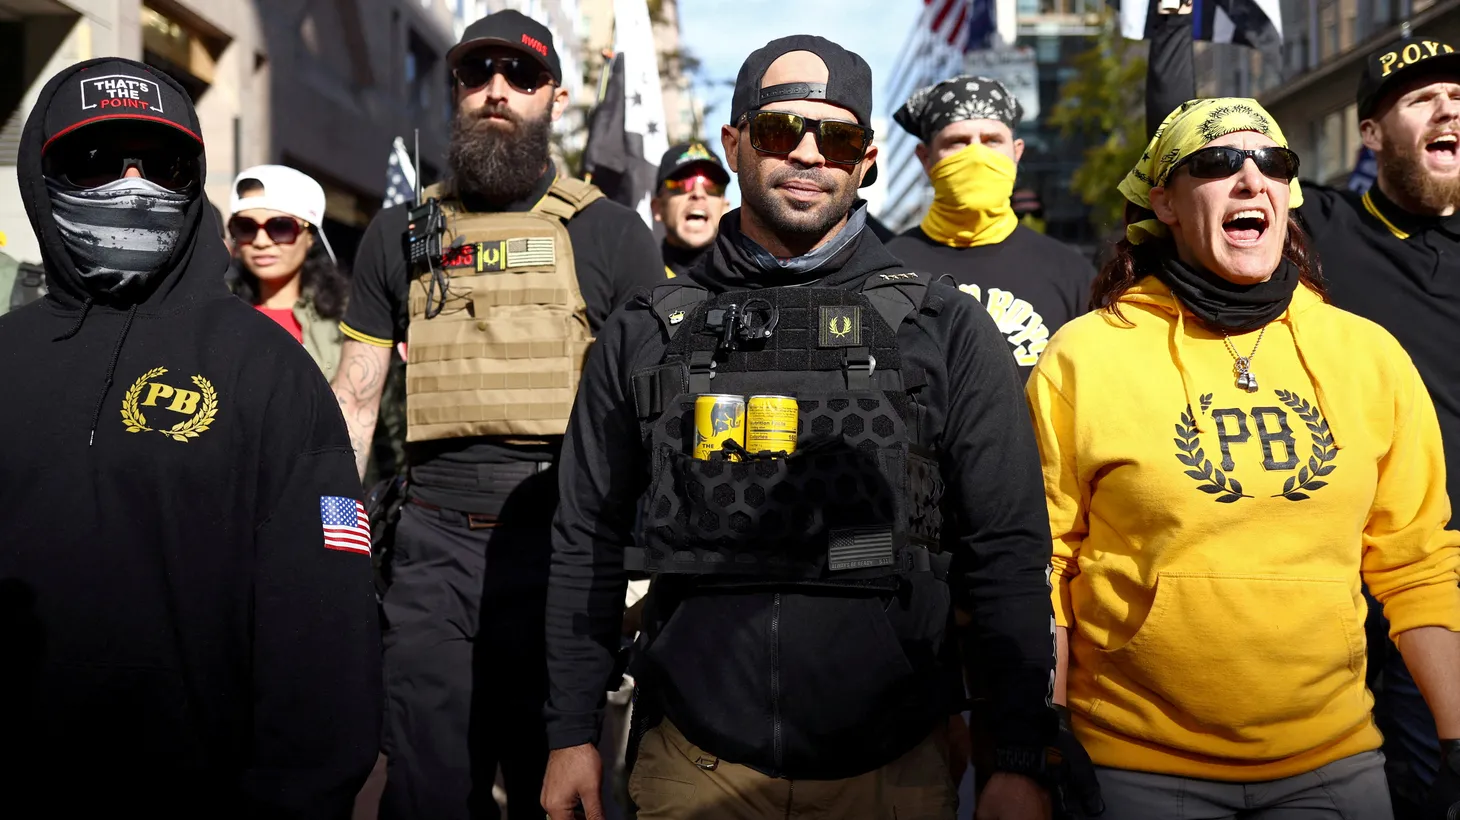 Members of the far-right Proud Boys, including leader Enrique Tarrio (center), rally in support of U.S. President Donald Trump to protest against the results of the 2020 U.S. presidential election, in Washington, U.S. November 14, 2020. REUTERS/